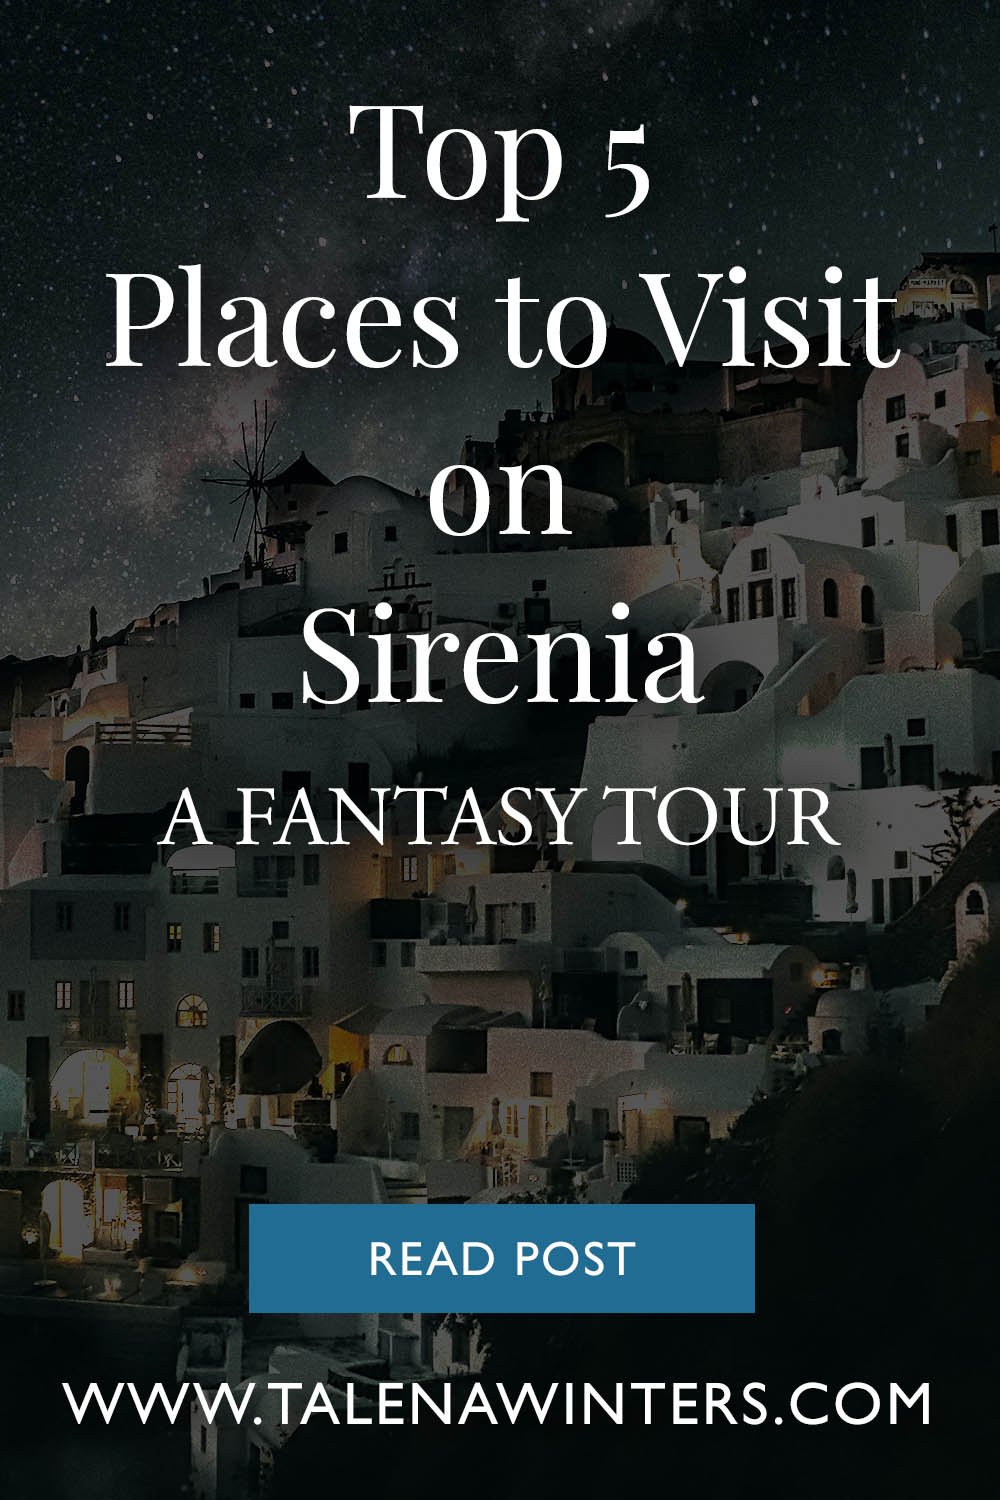 Top 5 Places to Visit on Sirenia